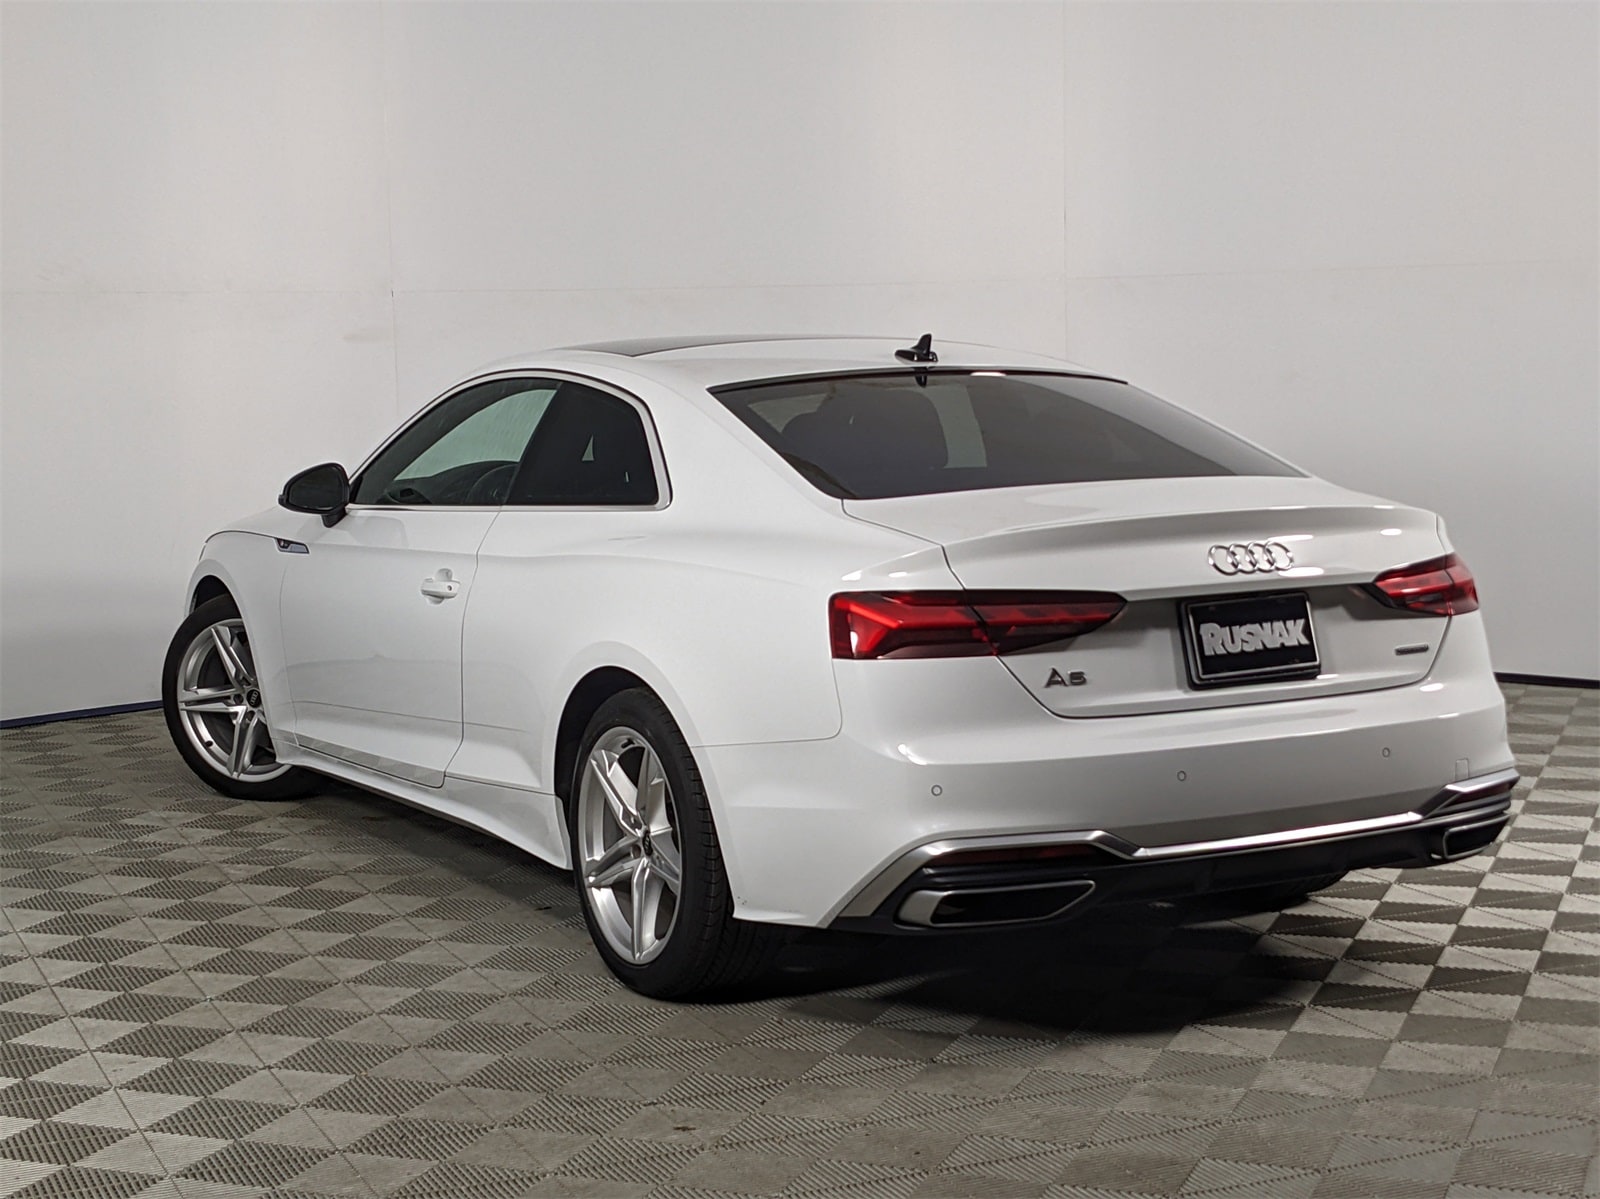 Used 2021 Audi A5 Coupe Premium with VIN WAUSAAF51MA045010 for sale in Pasadena, CA